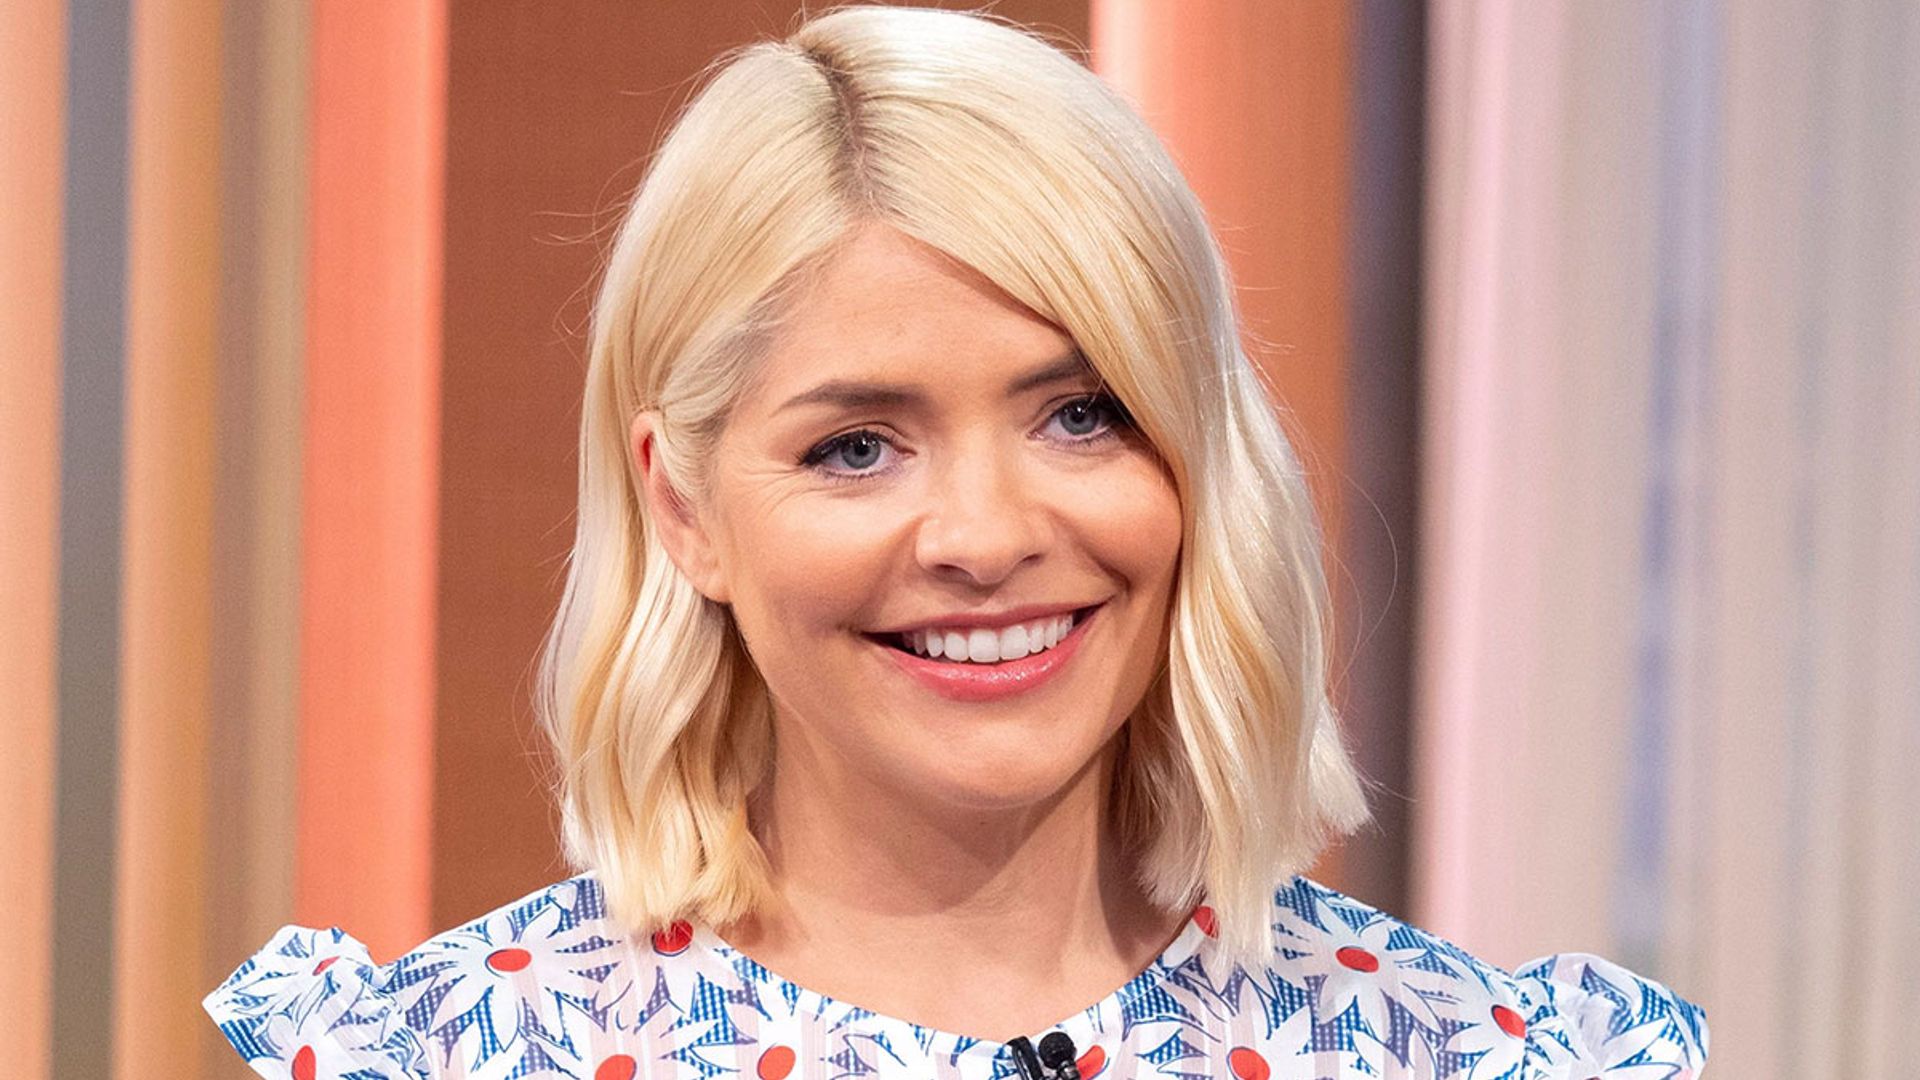 Holly Willoughby's embroidered ASOS dress has This Morning fans rushing to buy it